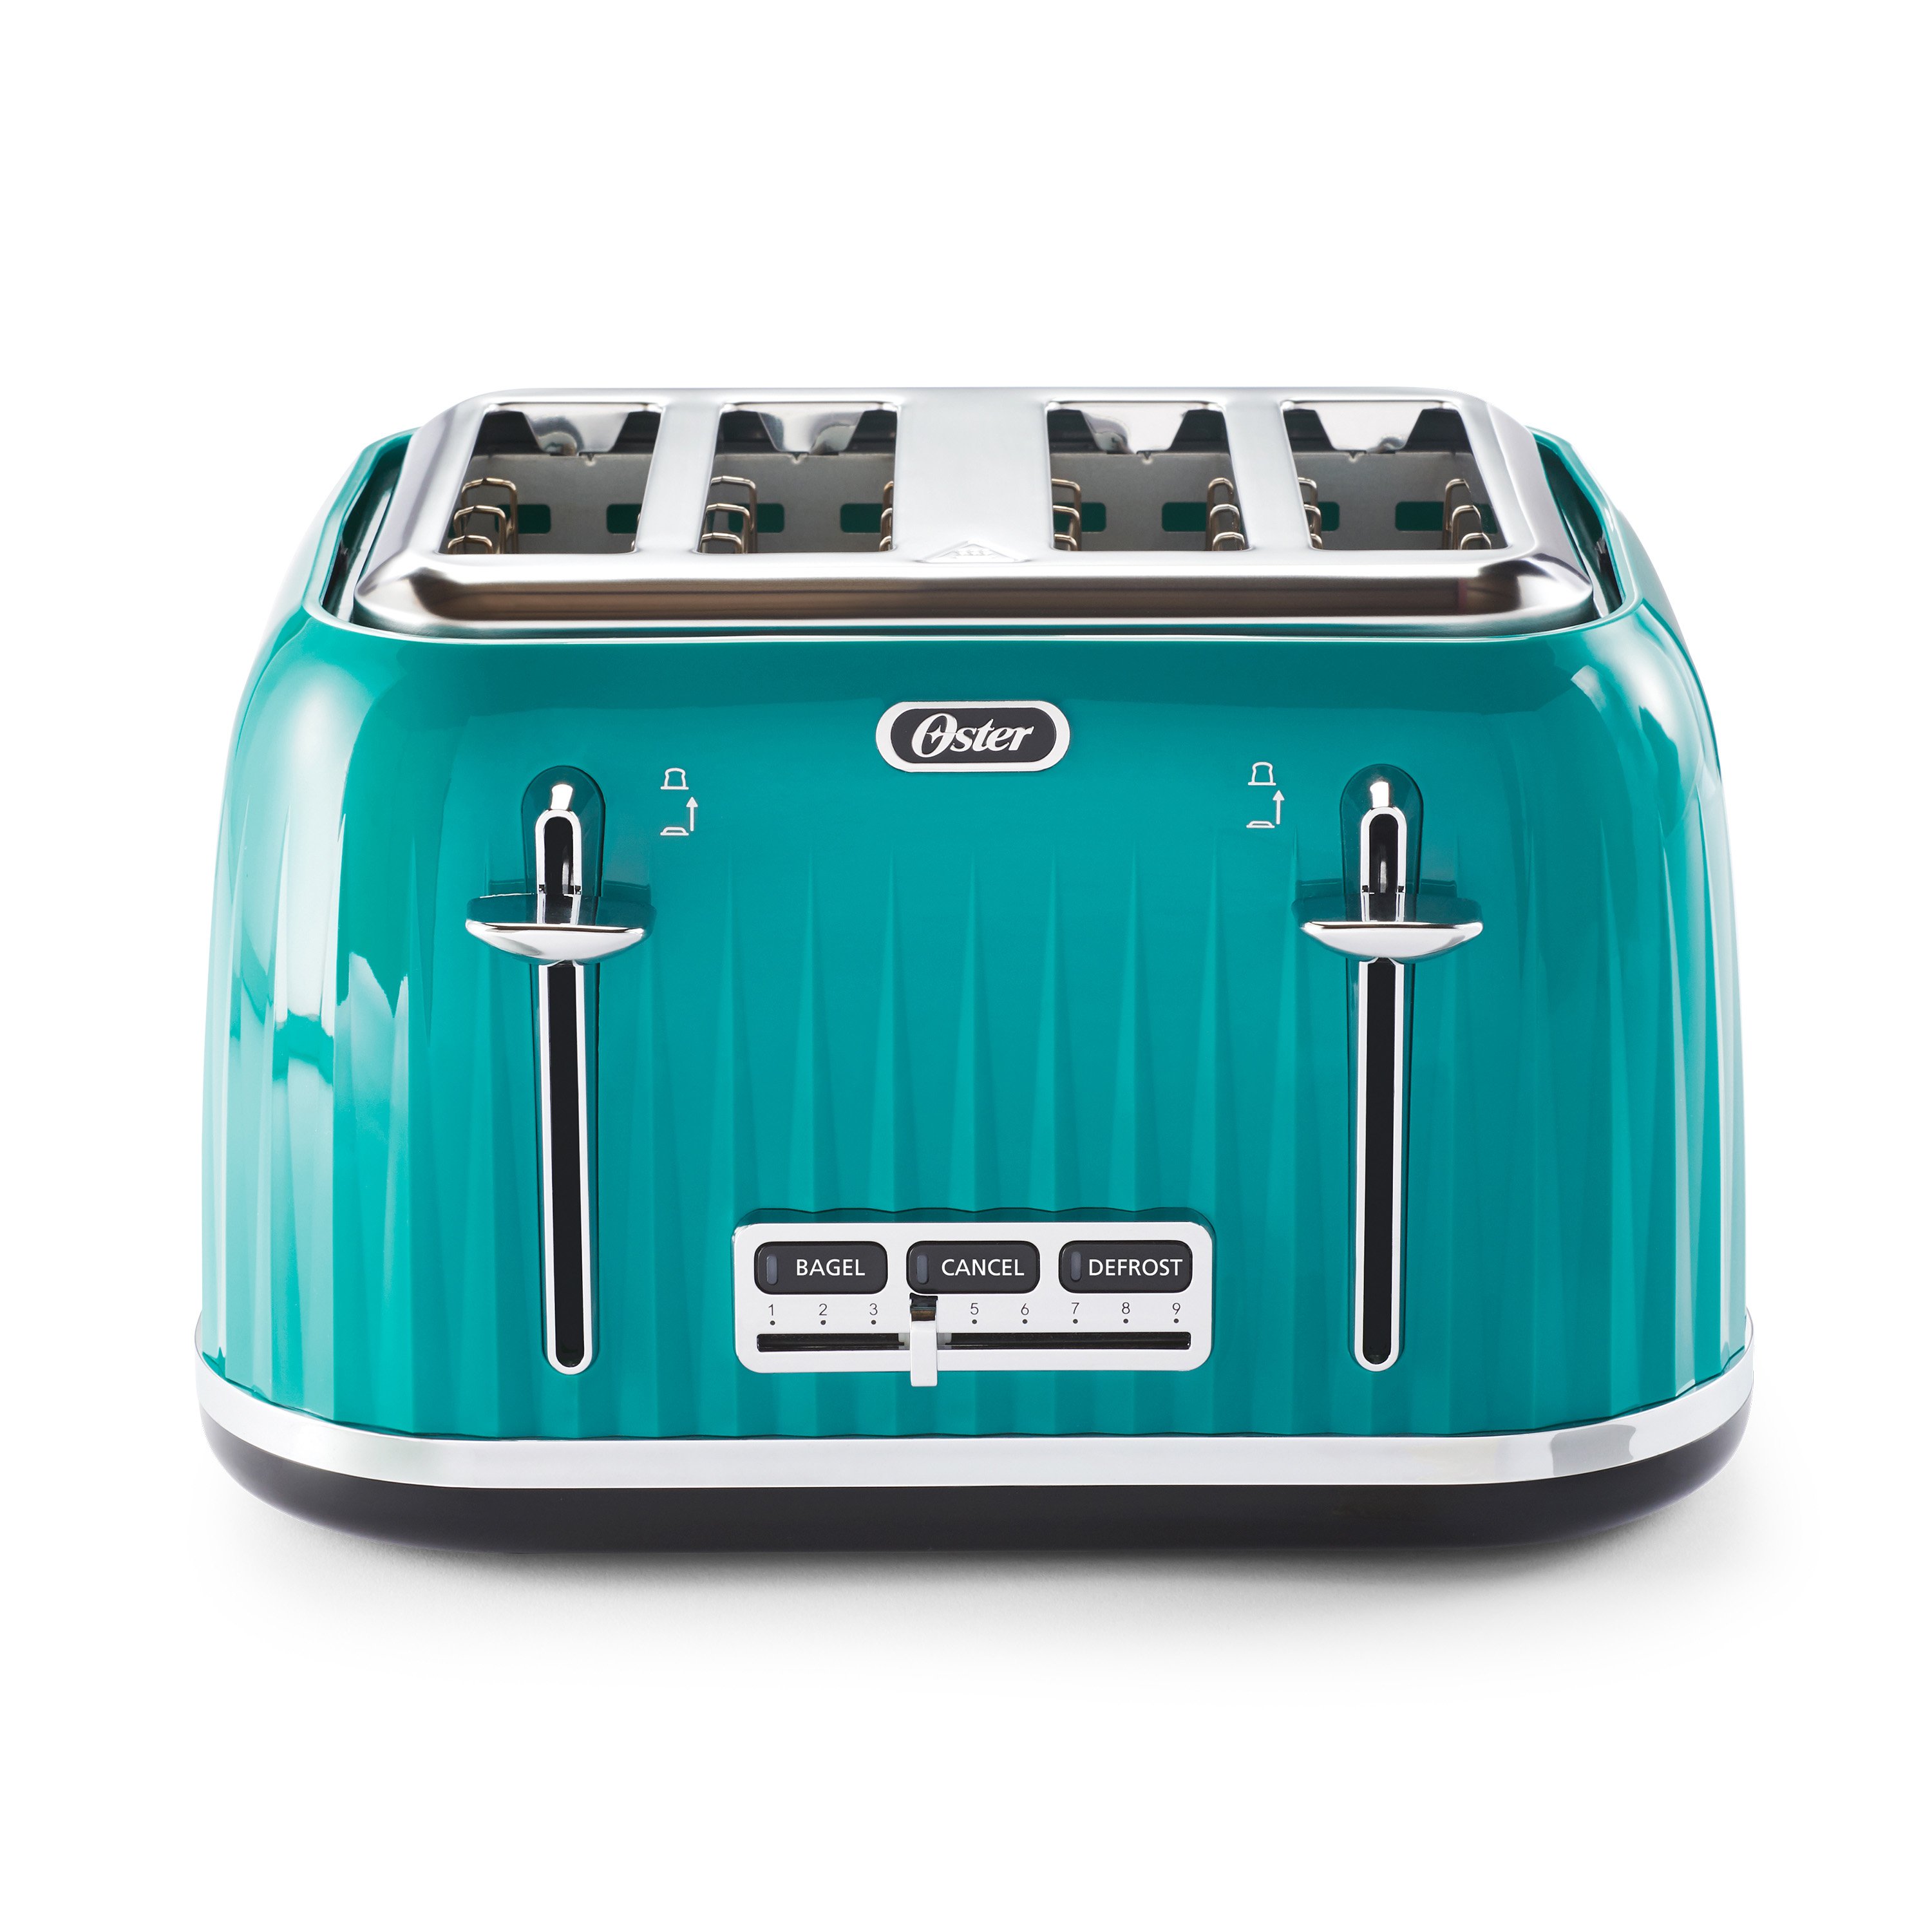 Oster® 4 Slice Toaster with Textured Design and Chrome Accents 